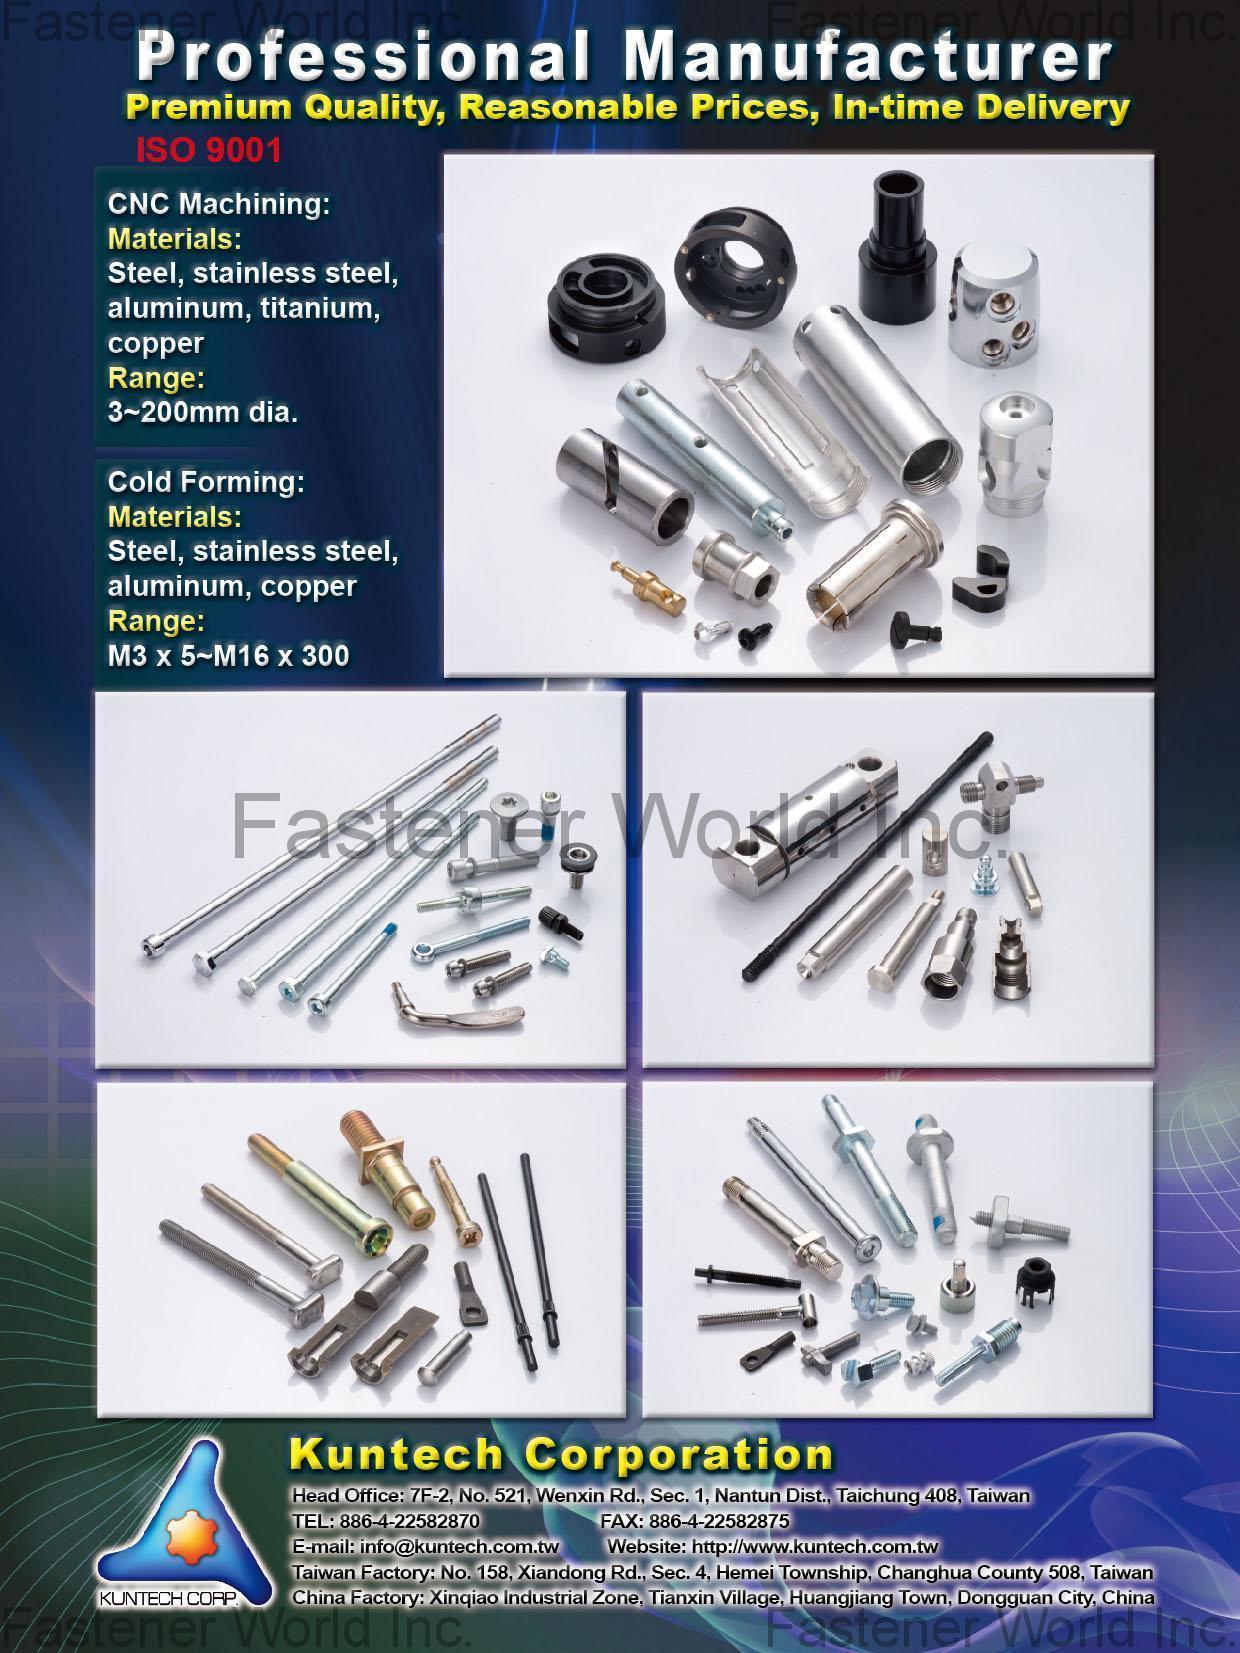 KUNTECH INTERNATIONAL CORP. , Standard, Customized Fasteners and Special Hardware, CNC Machining, Cold-Forming , Cnc Machining Parts